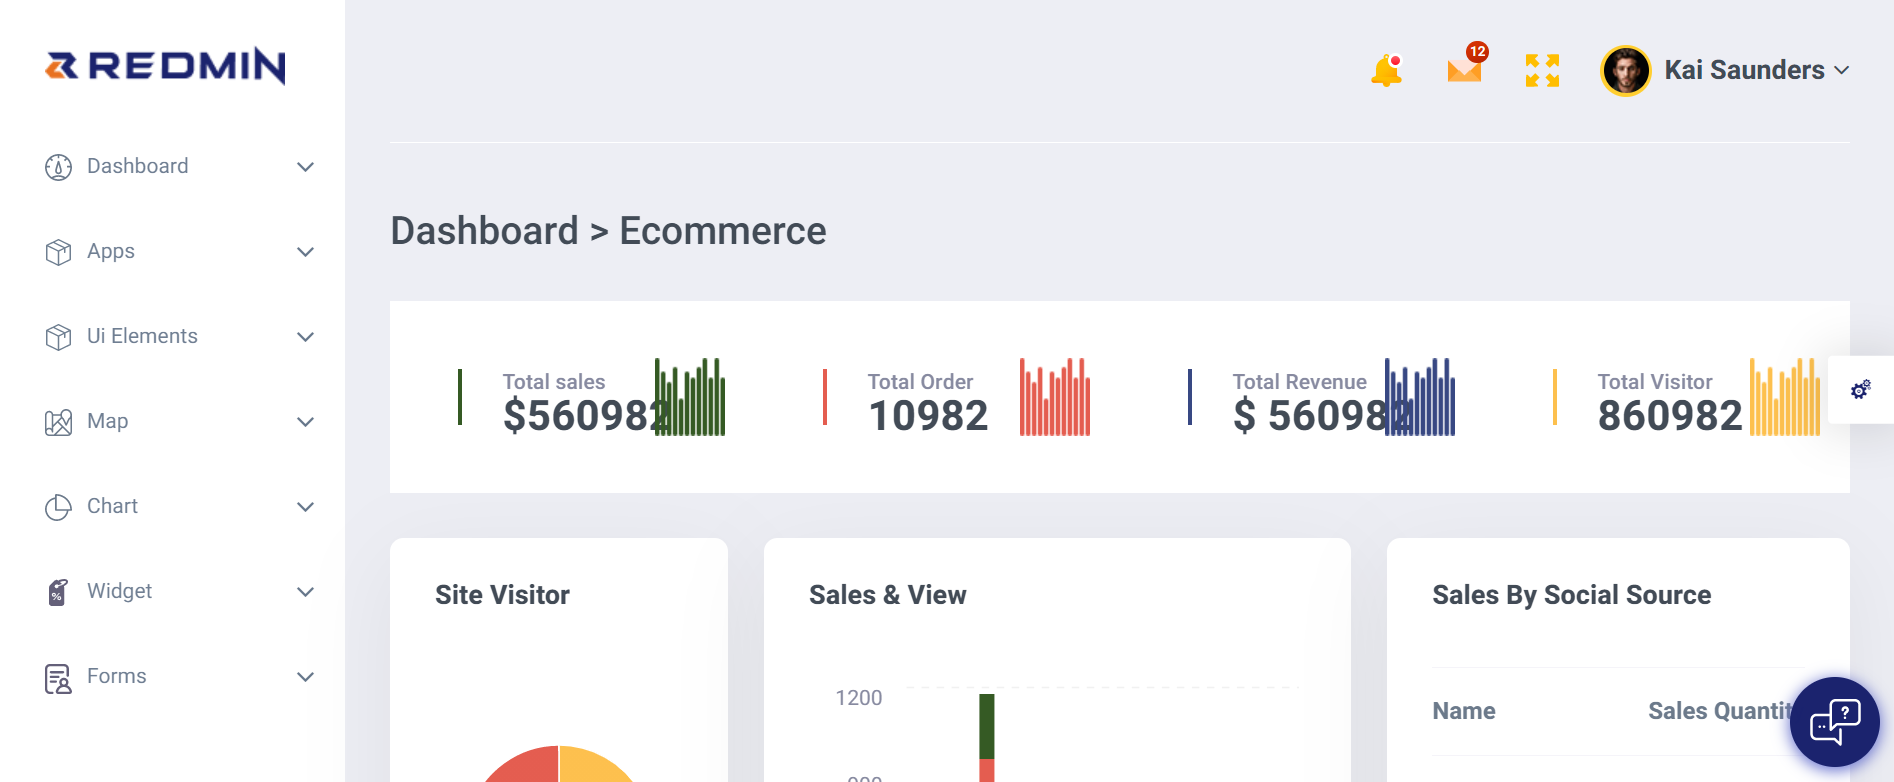 Dashboard-Ecommerce.png